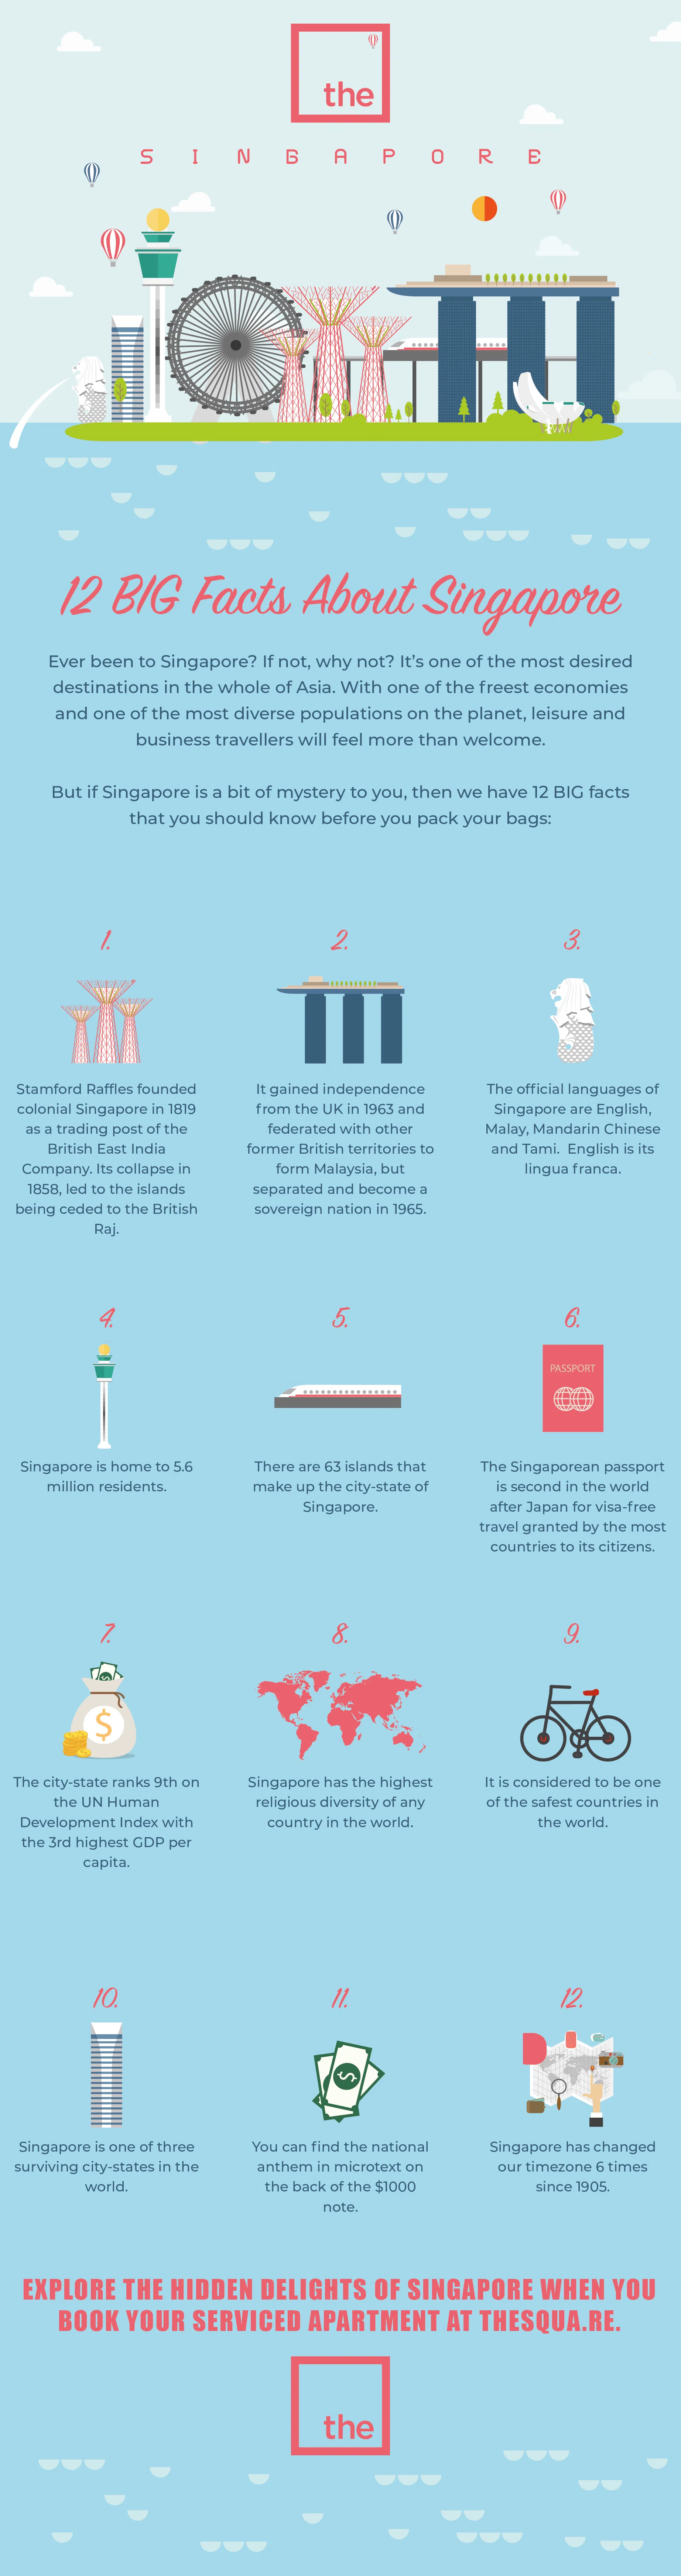 Facts About Singapore